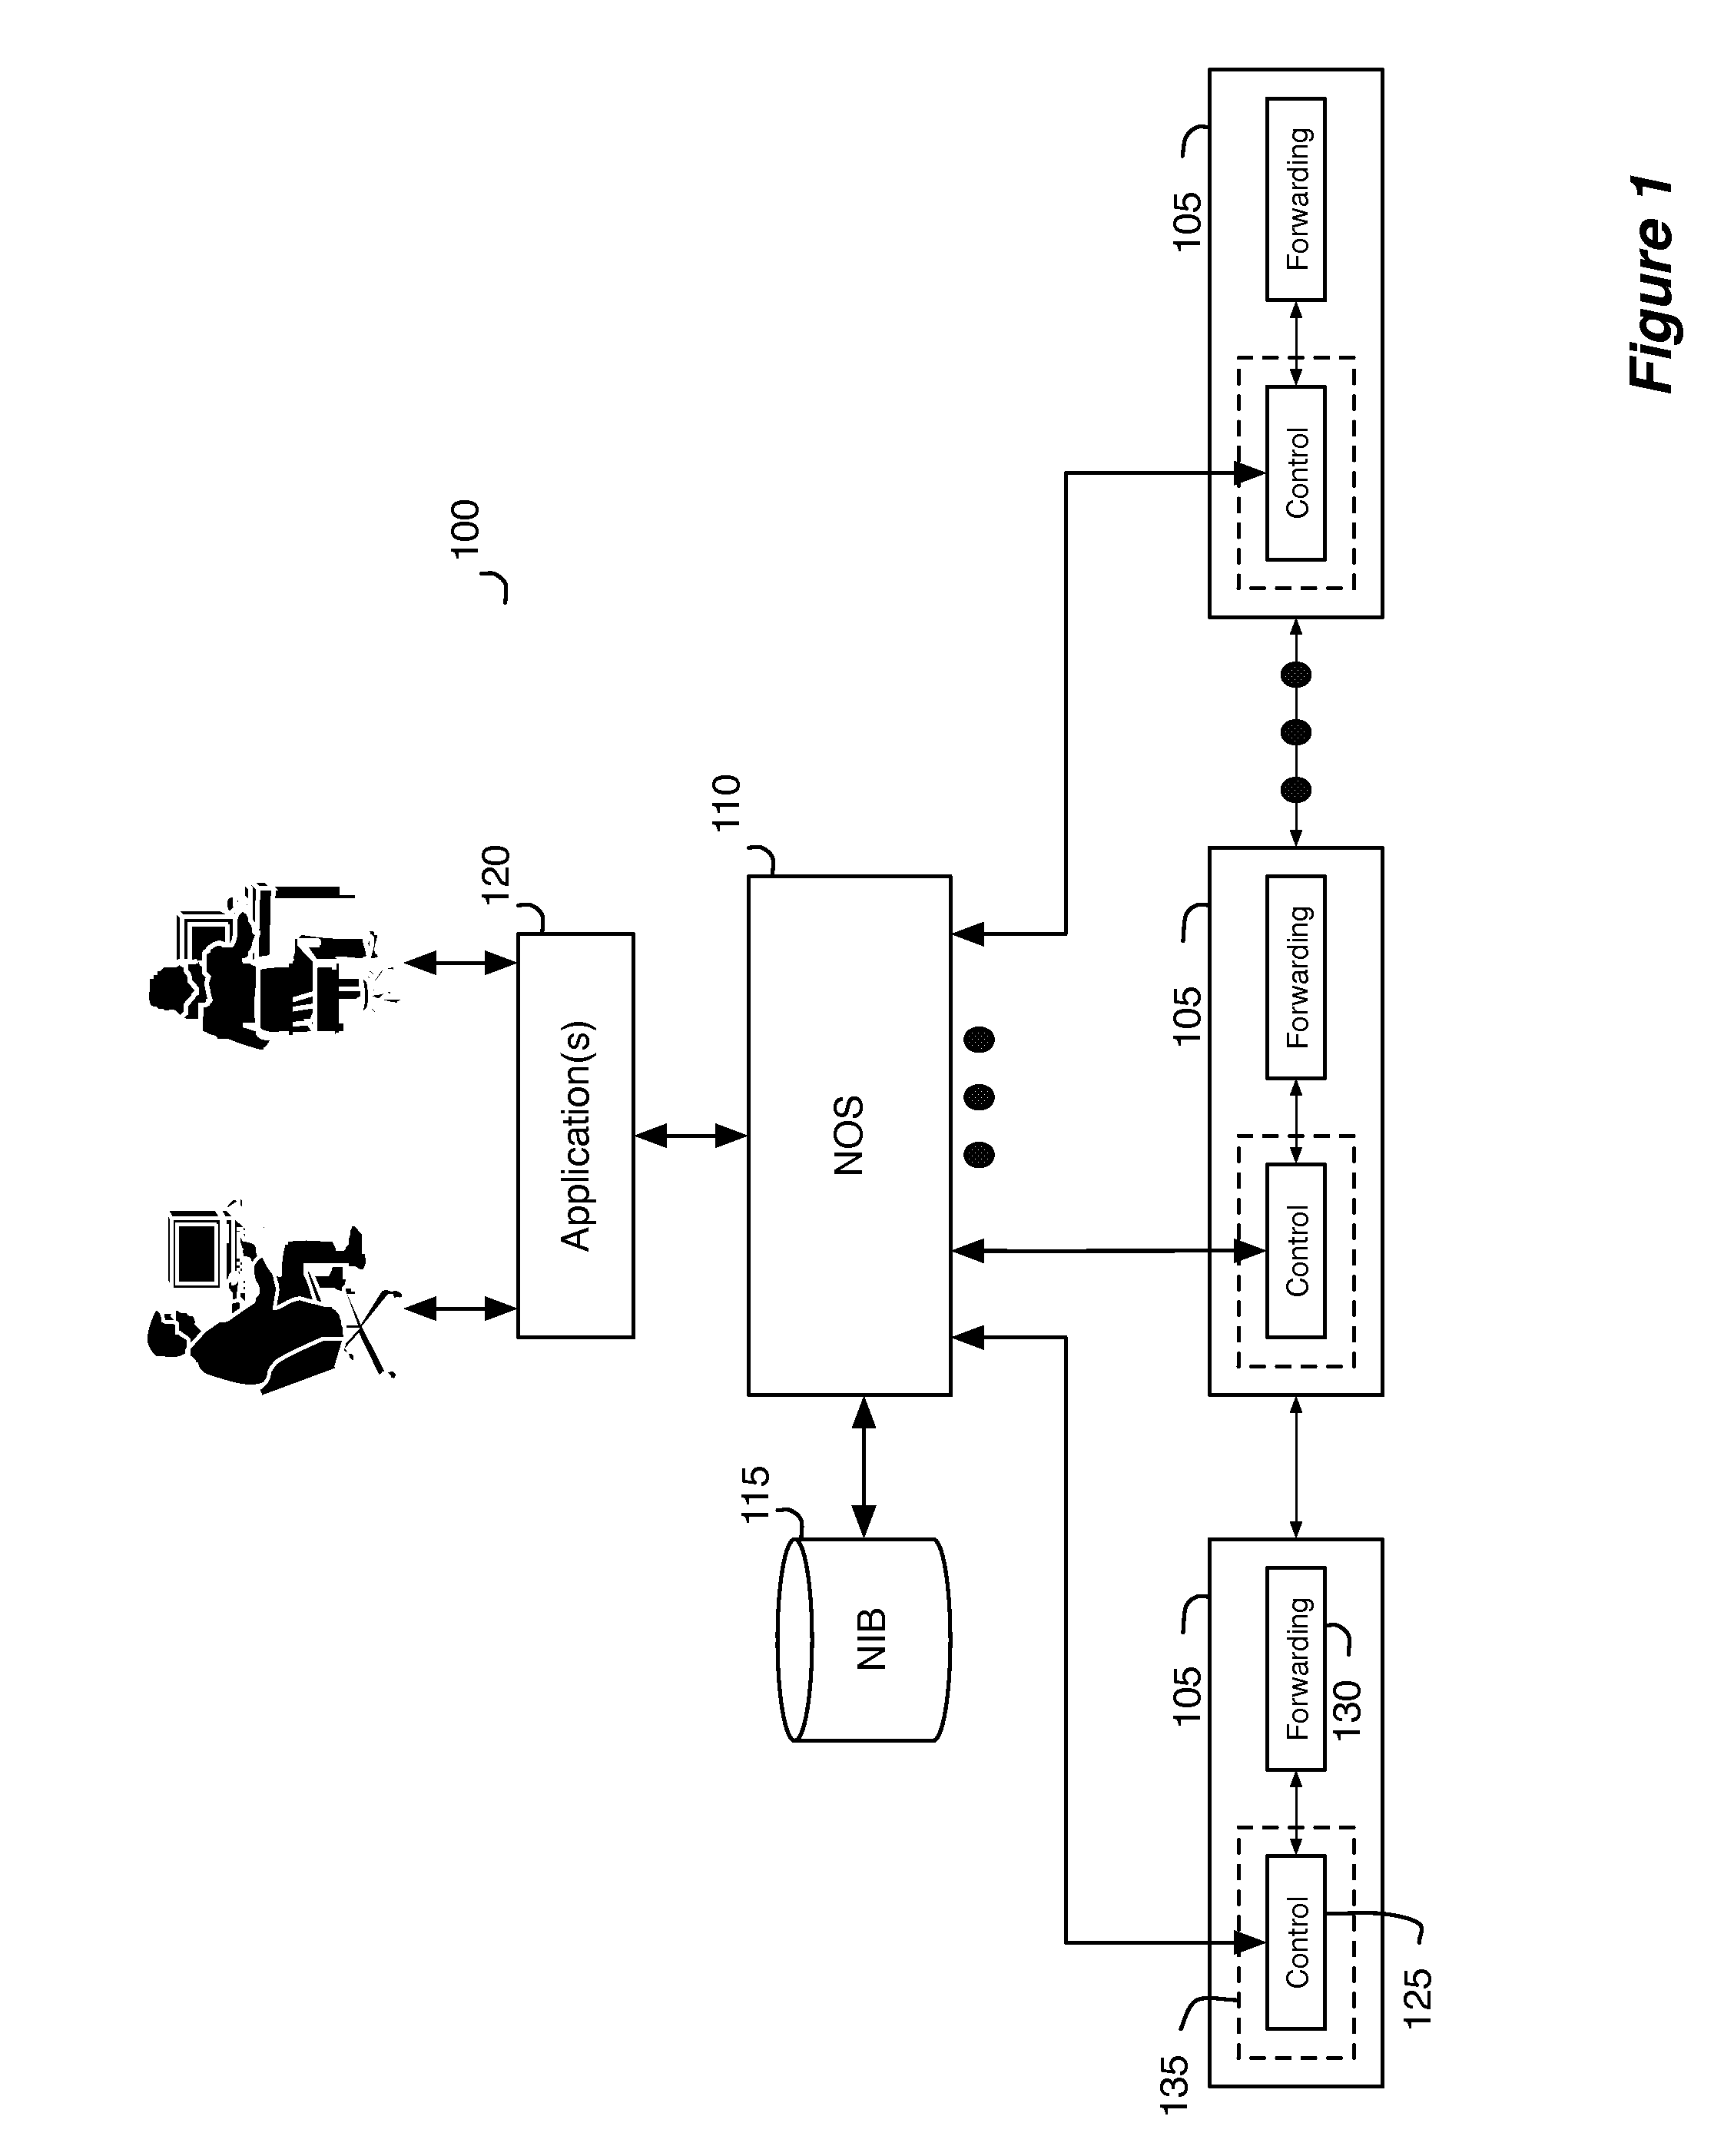 Distributed network control apparatus and method